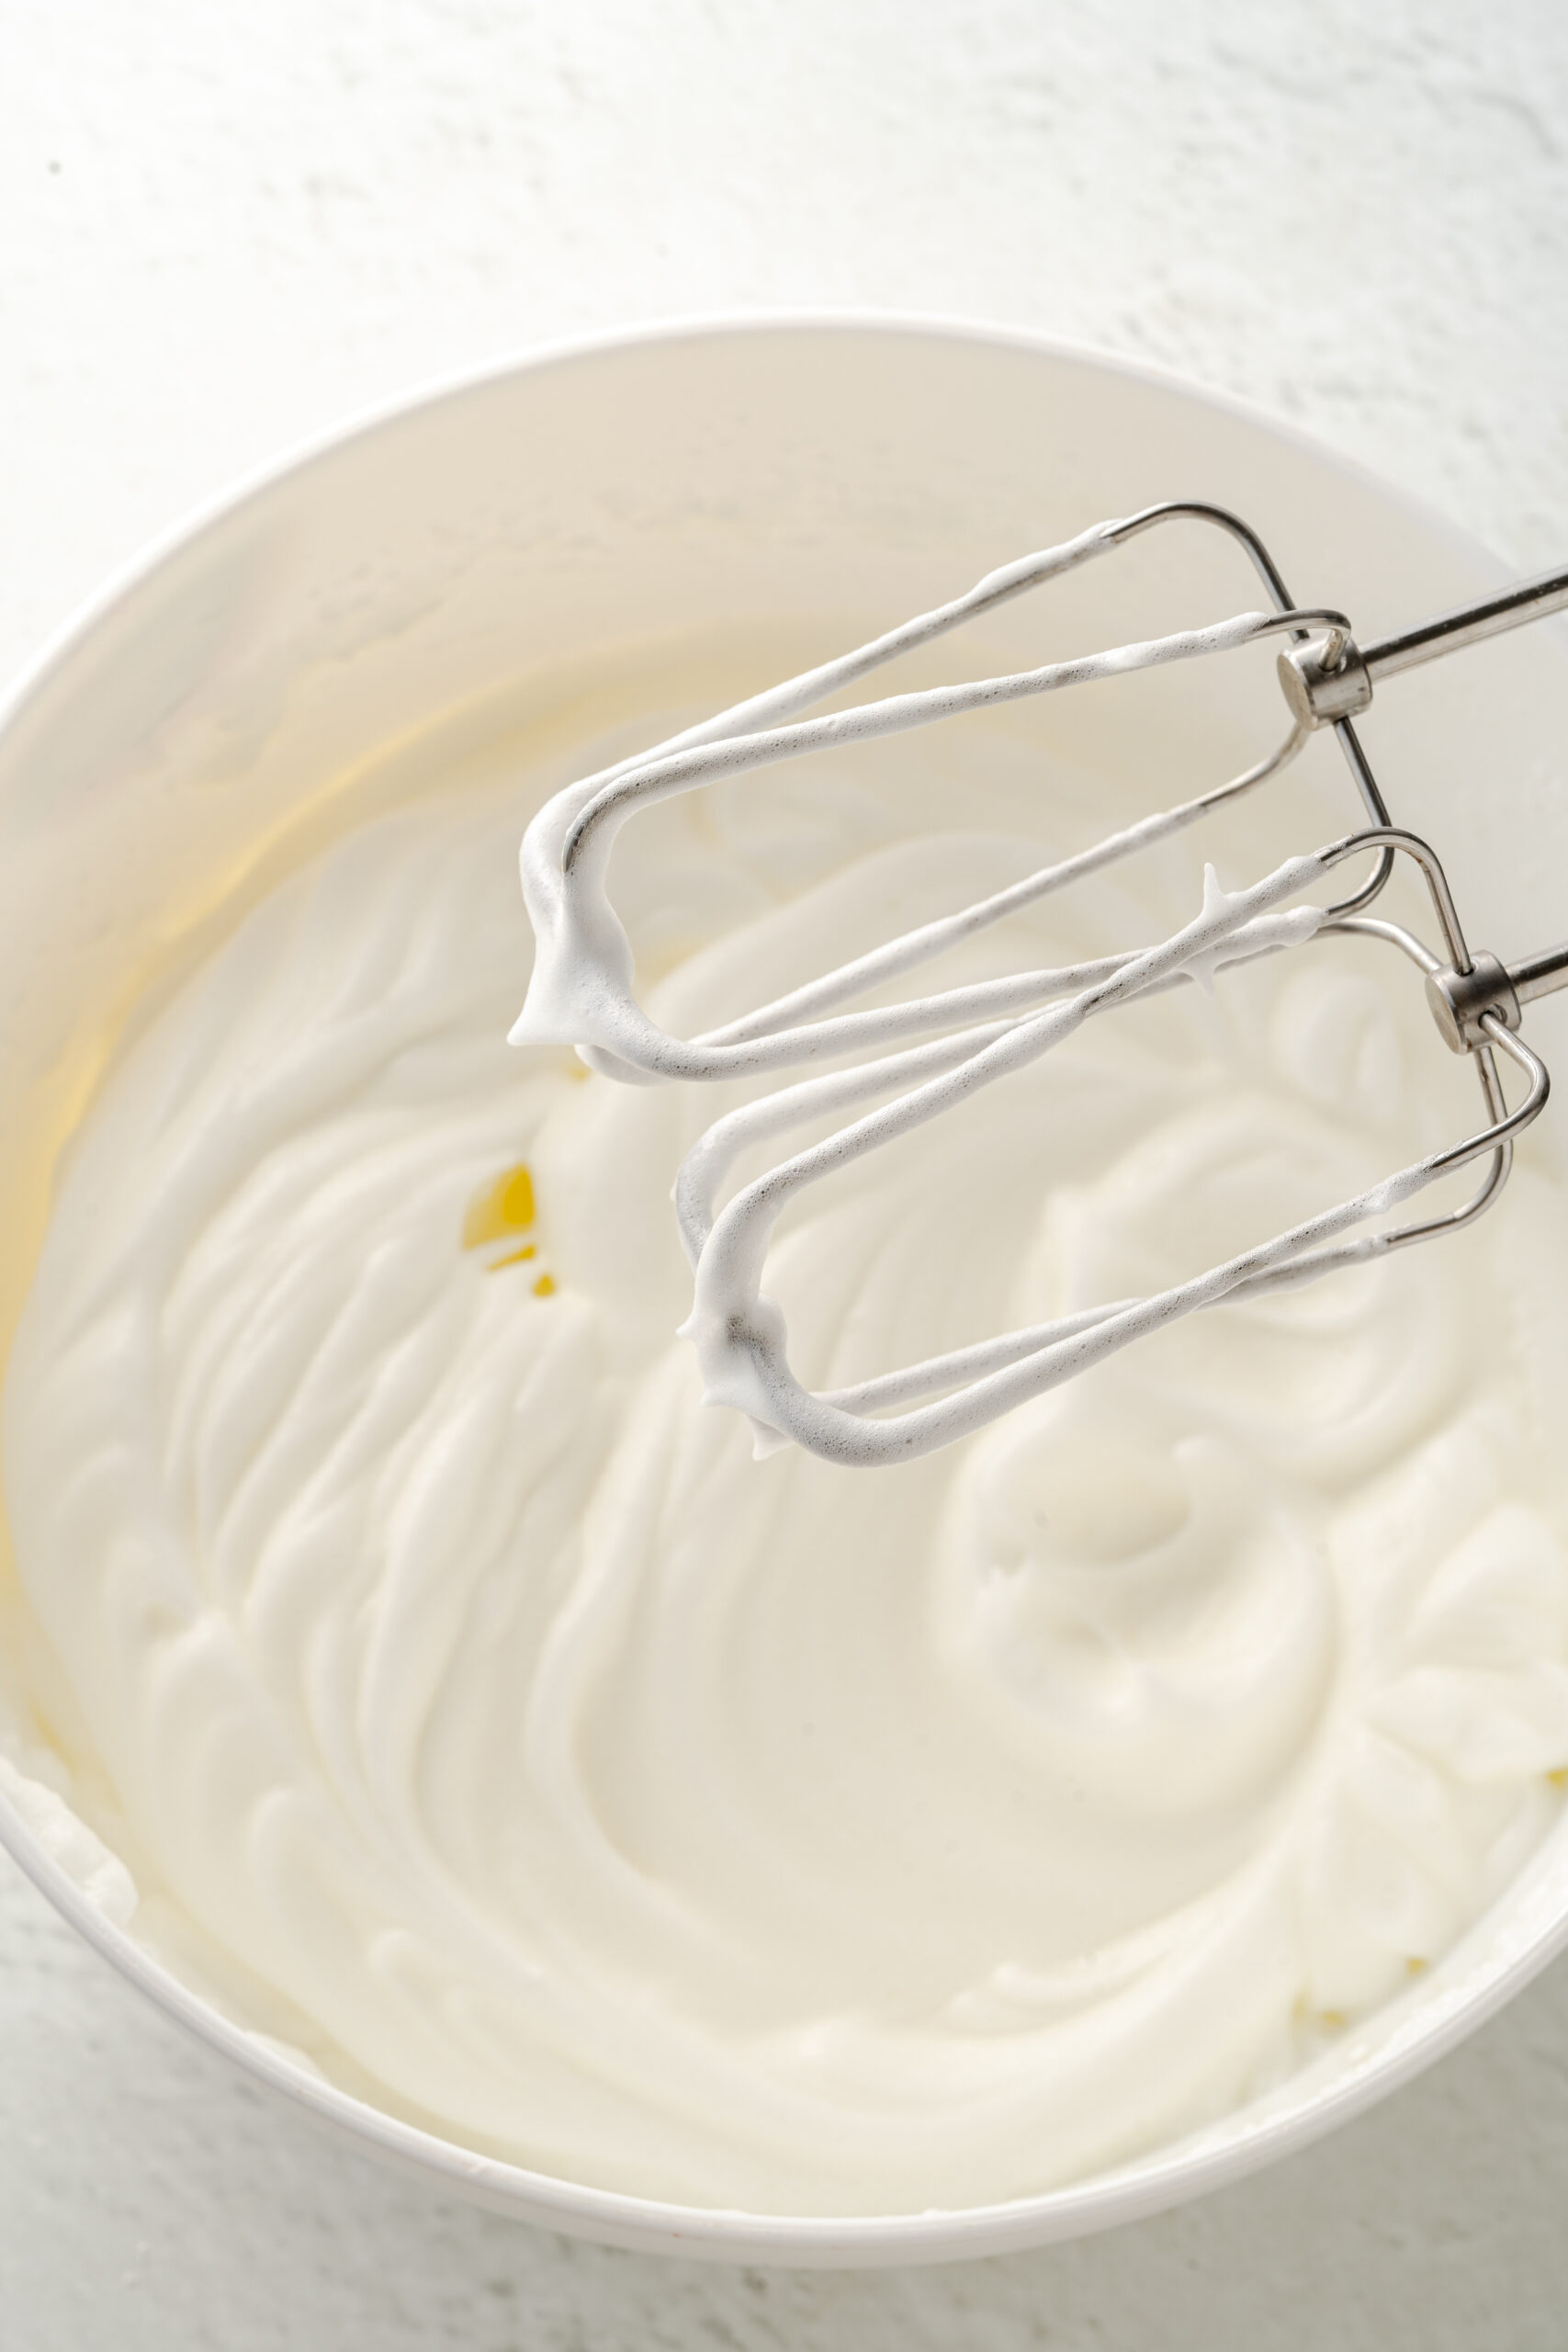 Whipped egg whites in a mixing bowl with electric mixer in it.